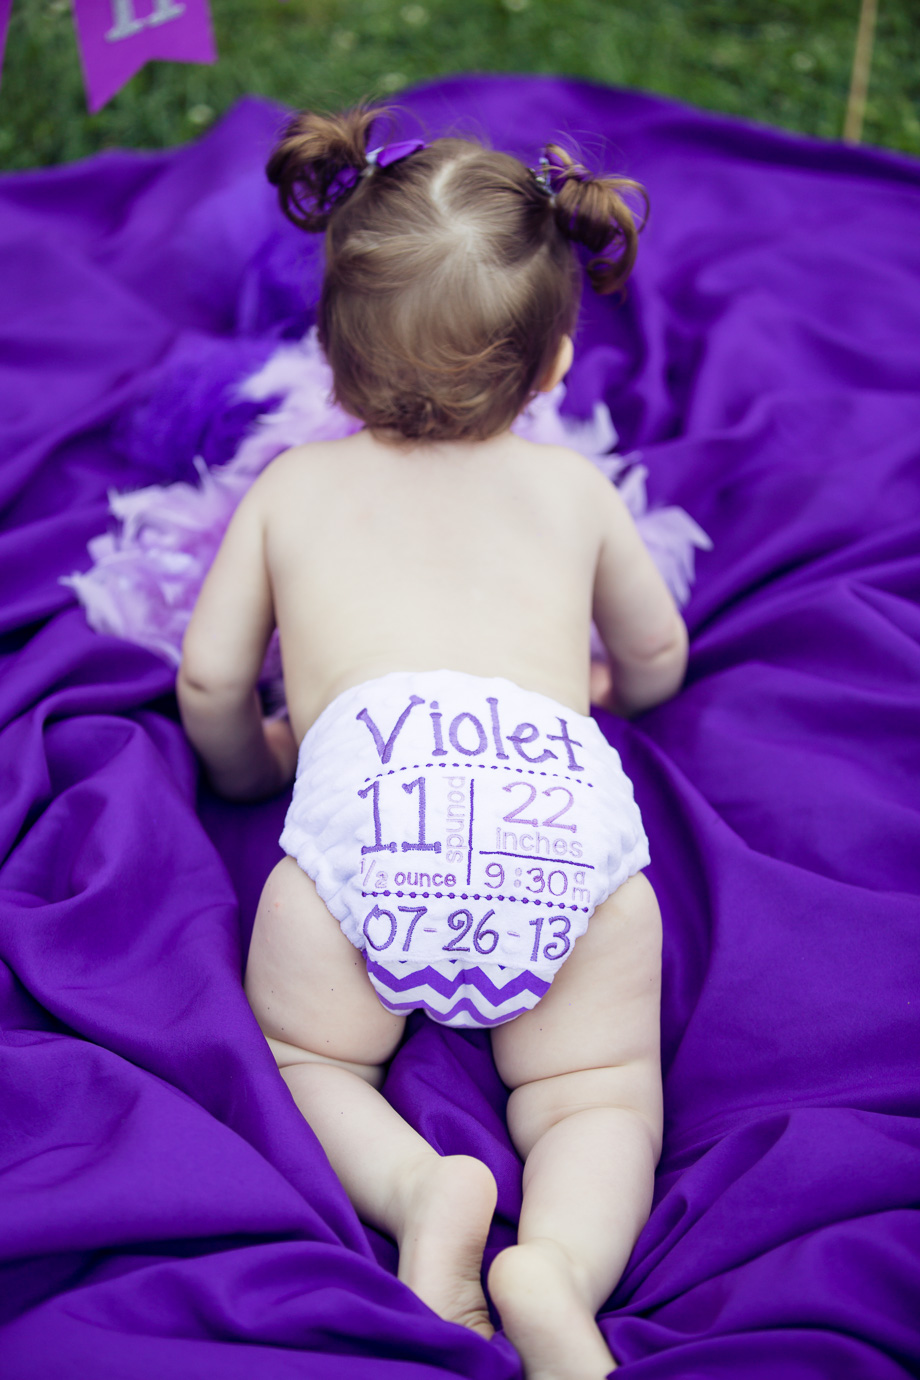 Violets cute diaper with her birthday written on it